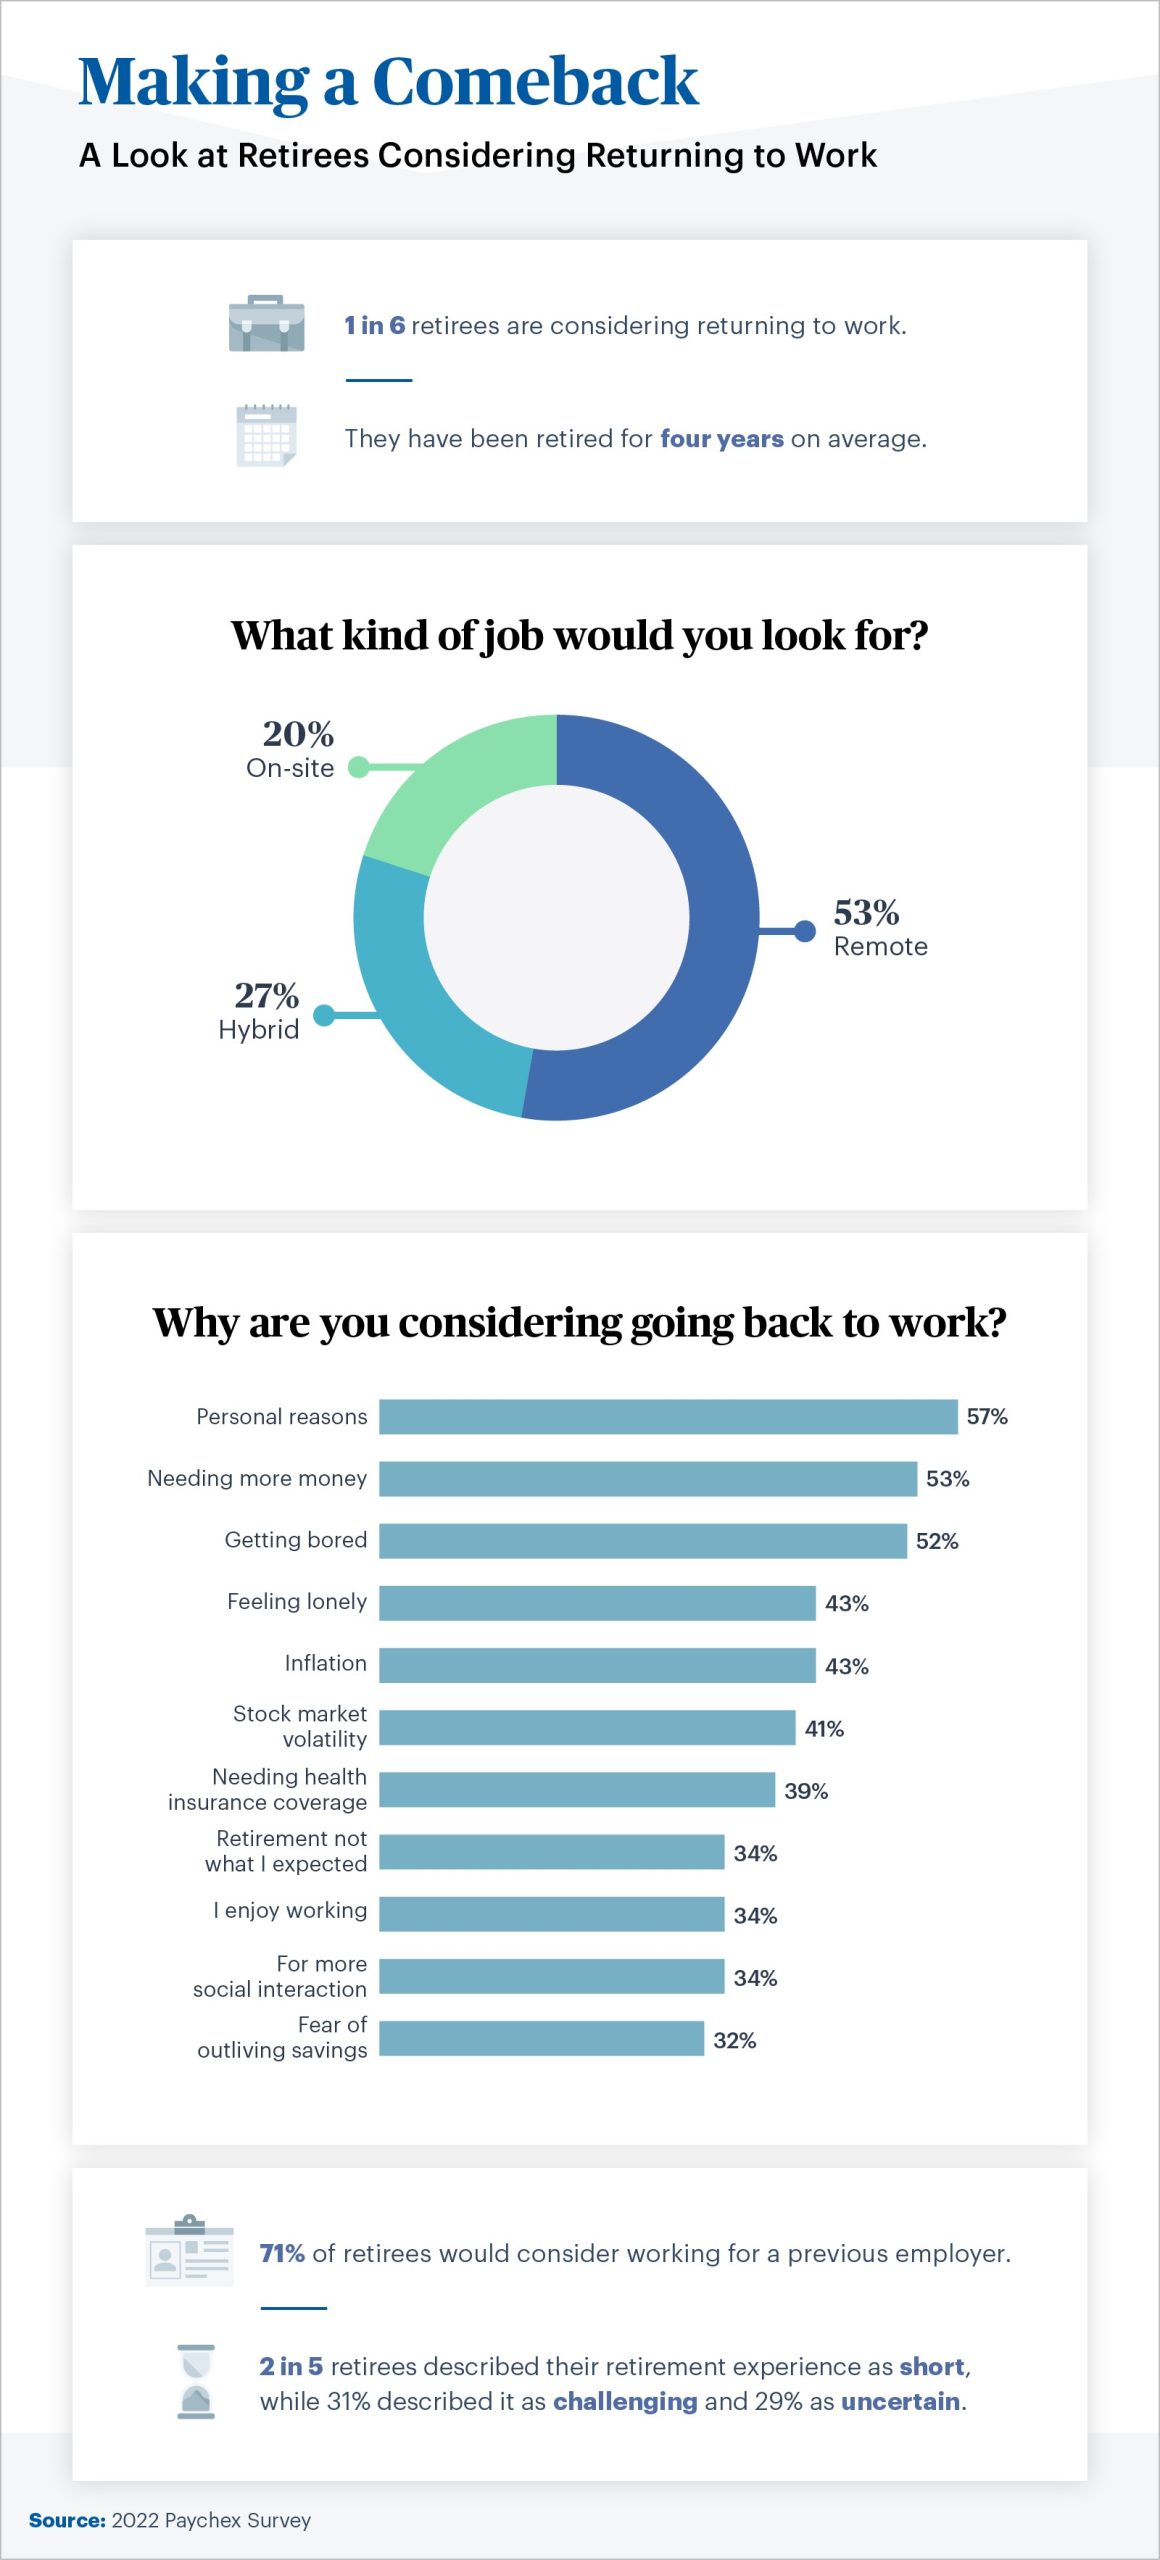 1 in 6 retirees are considering returning to work, and 53% want remote positions